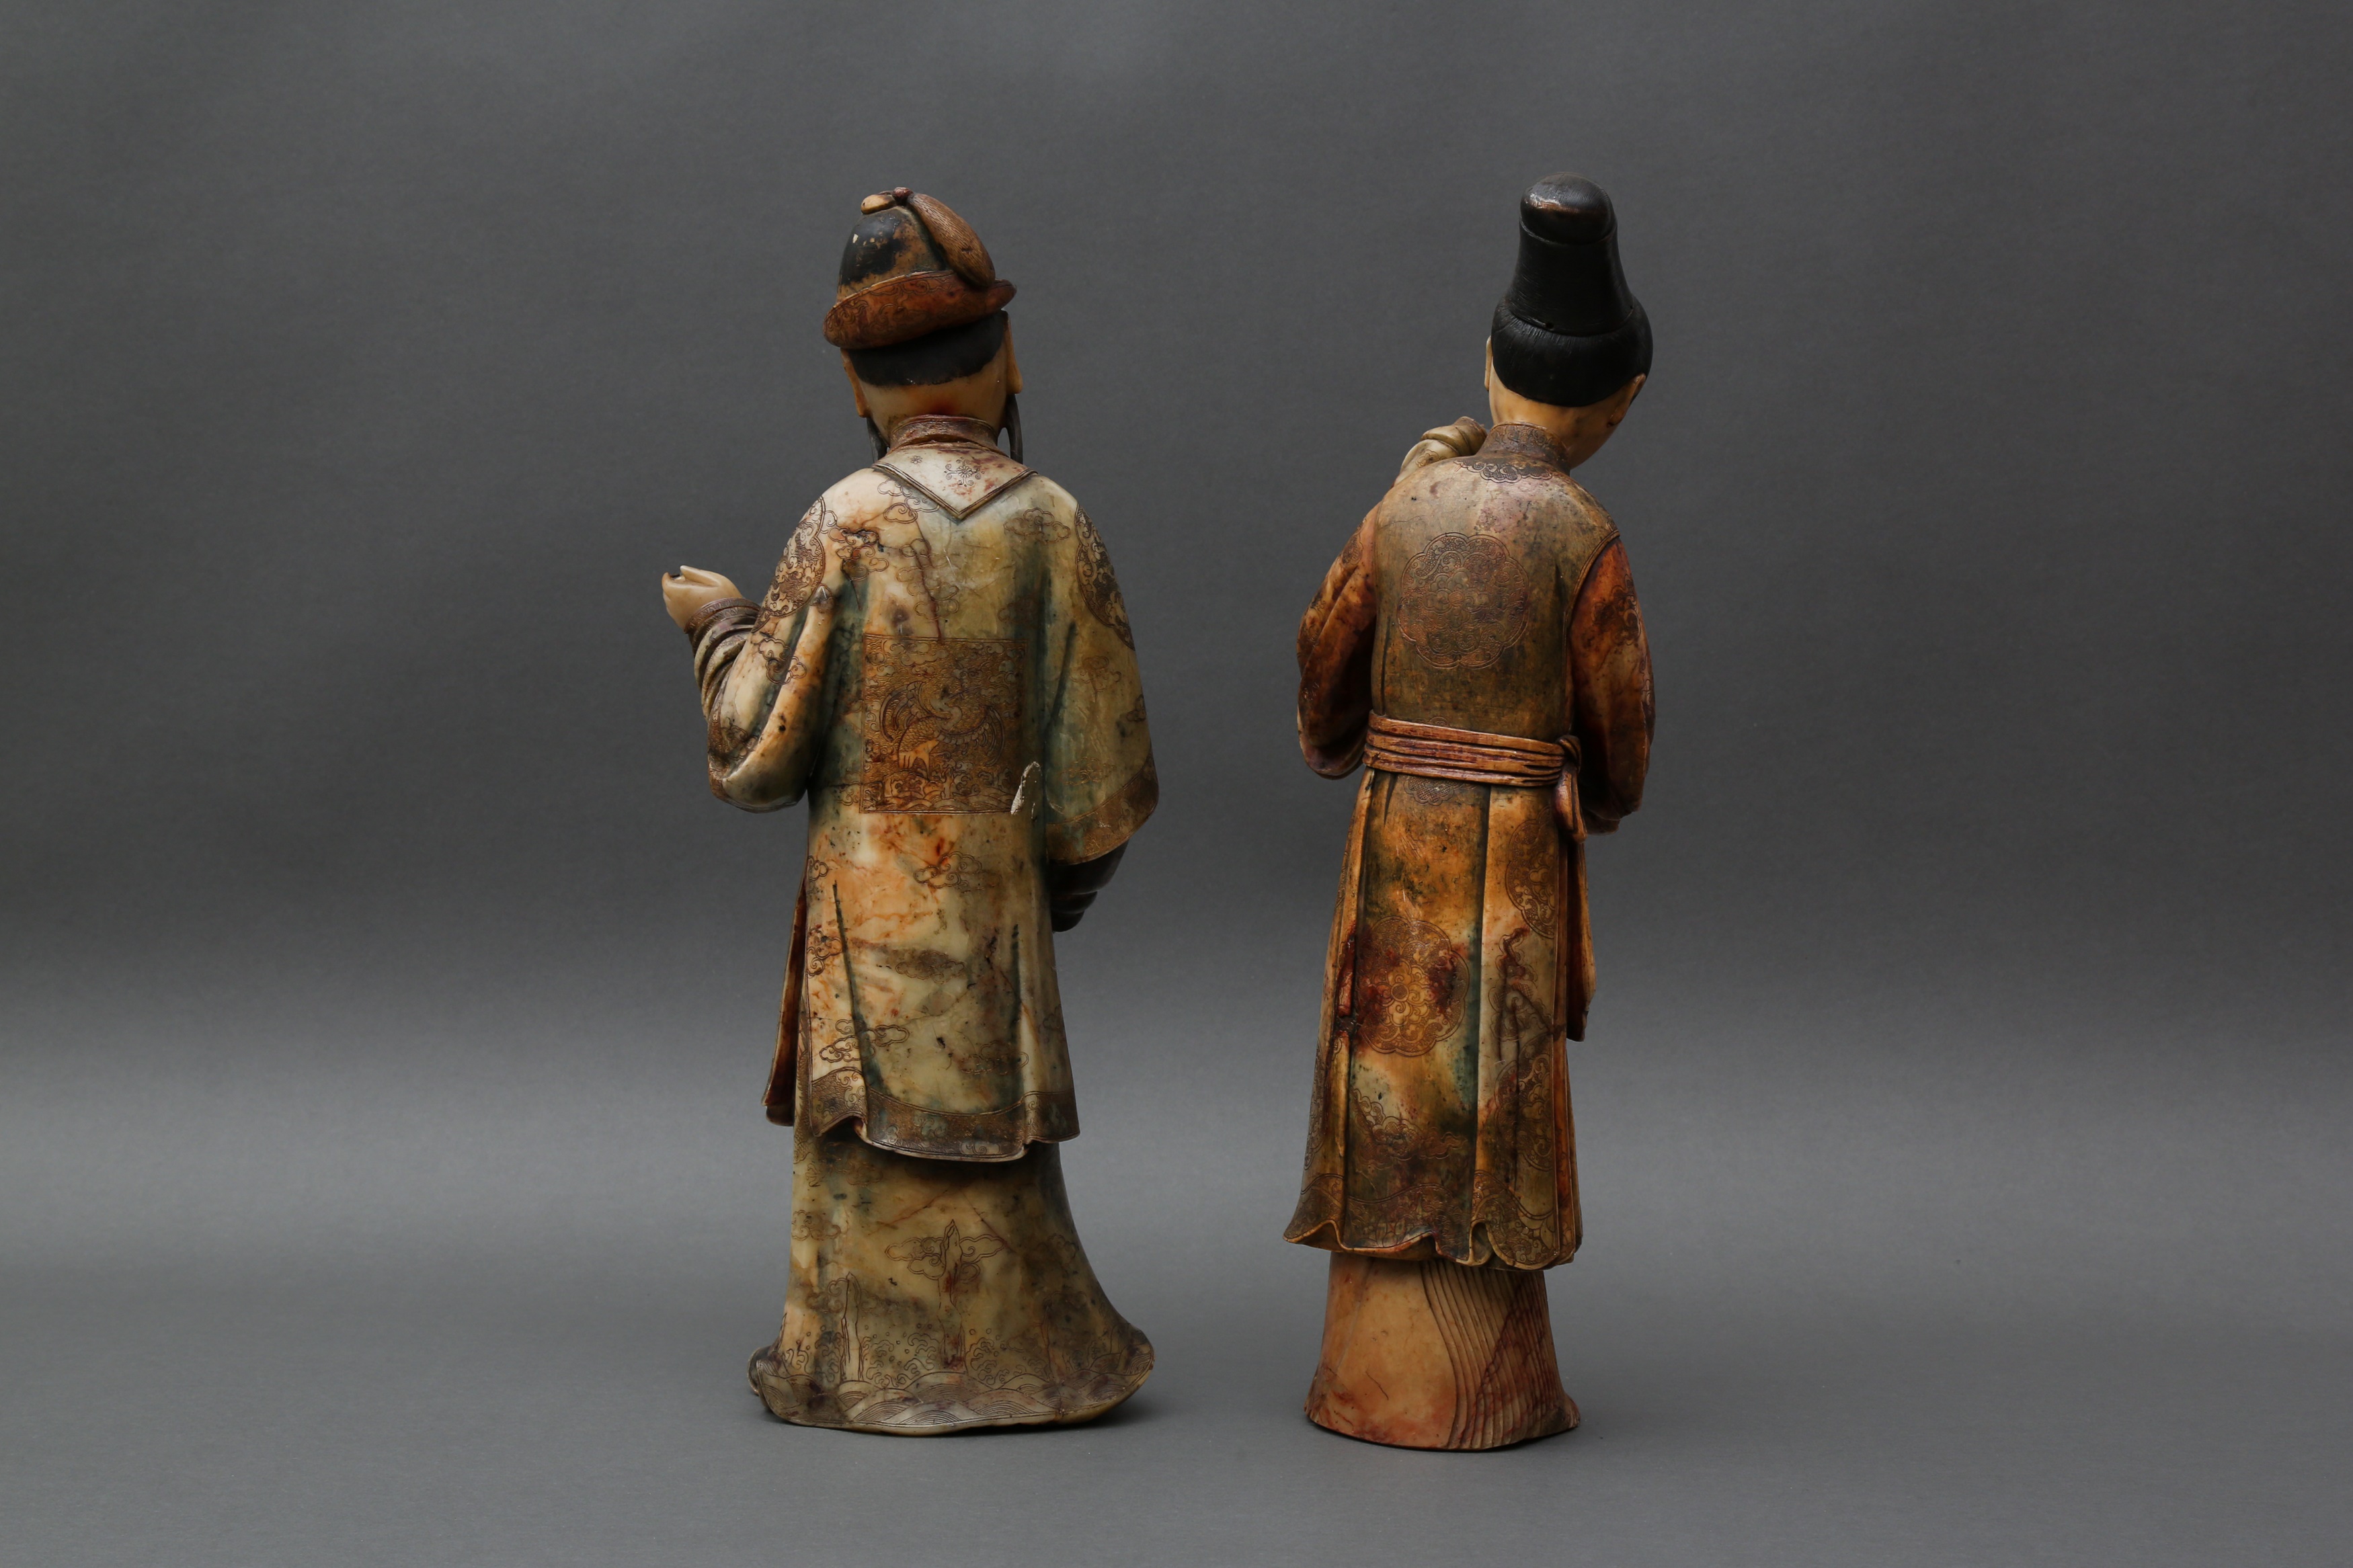 TWO RARE AND IMPRESSIVE CHINESE SOAPSTONE STANDING COURT FIGURES 清十八世紀 壽山石清廷人物像兩件 - Image 9 of 47